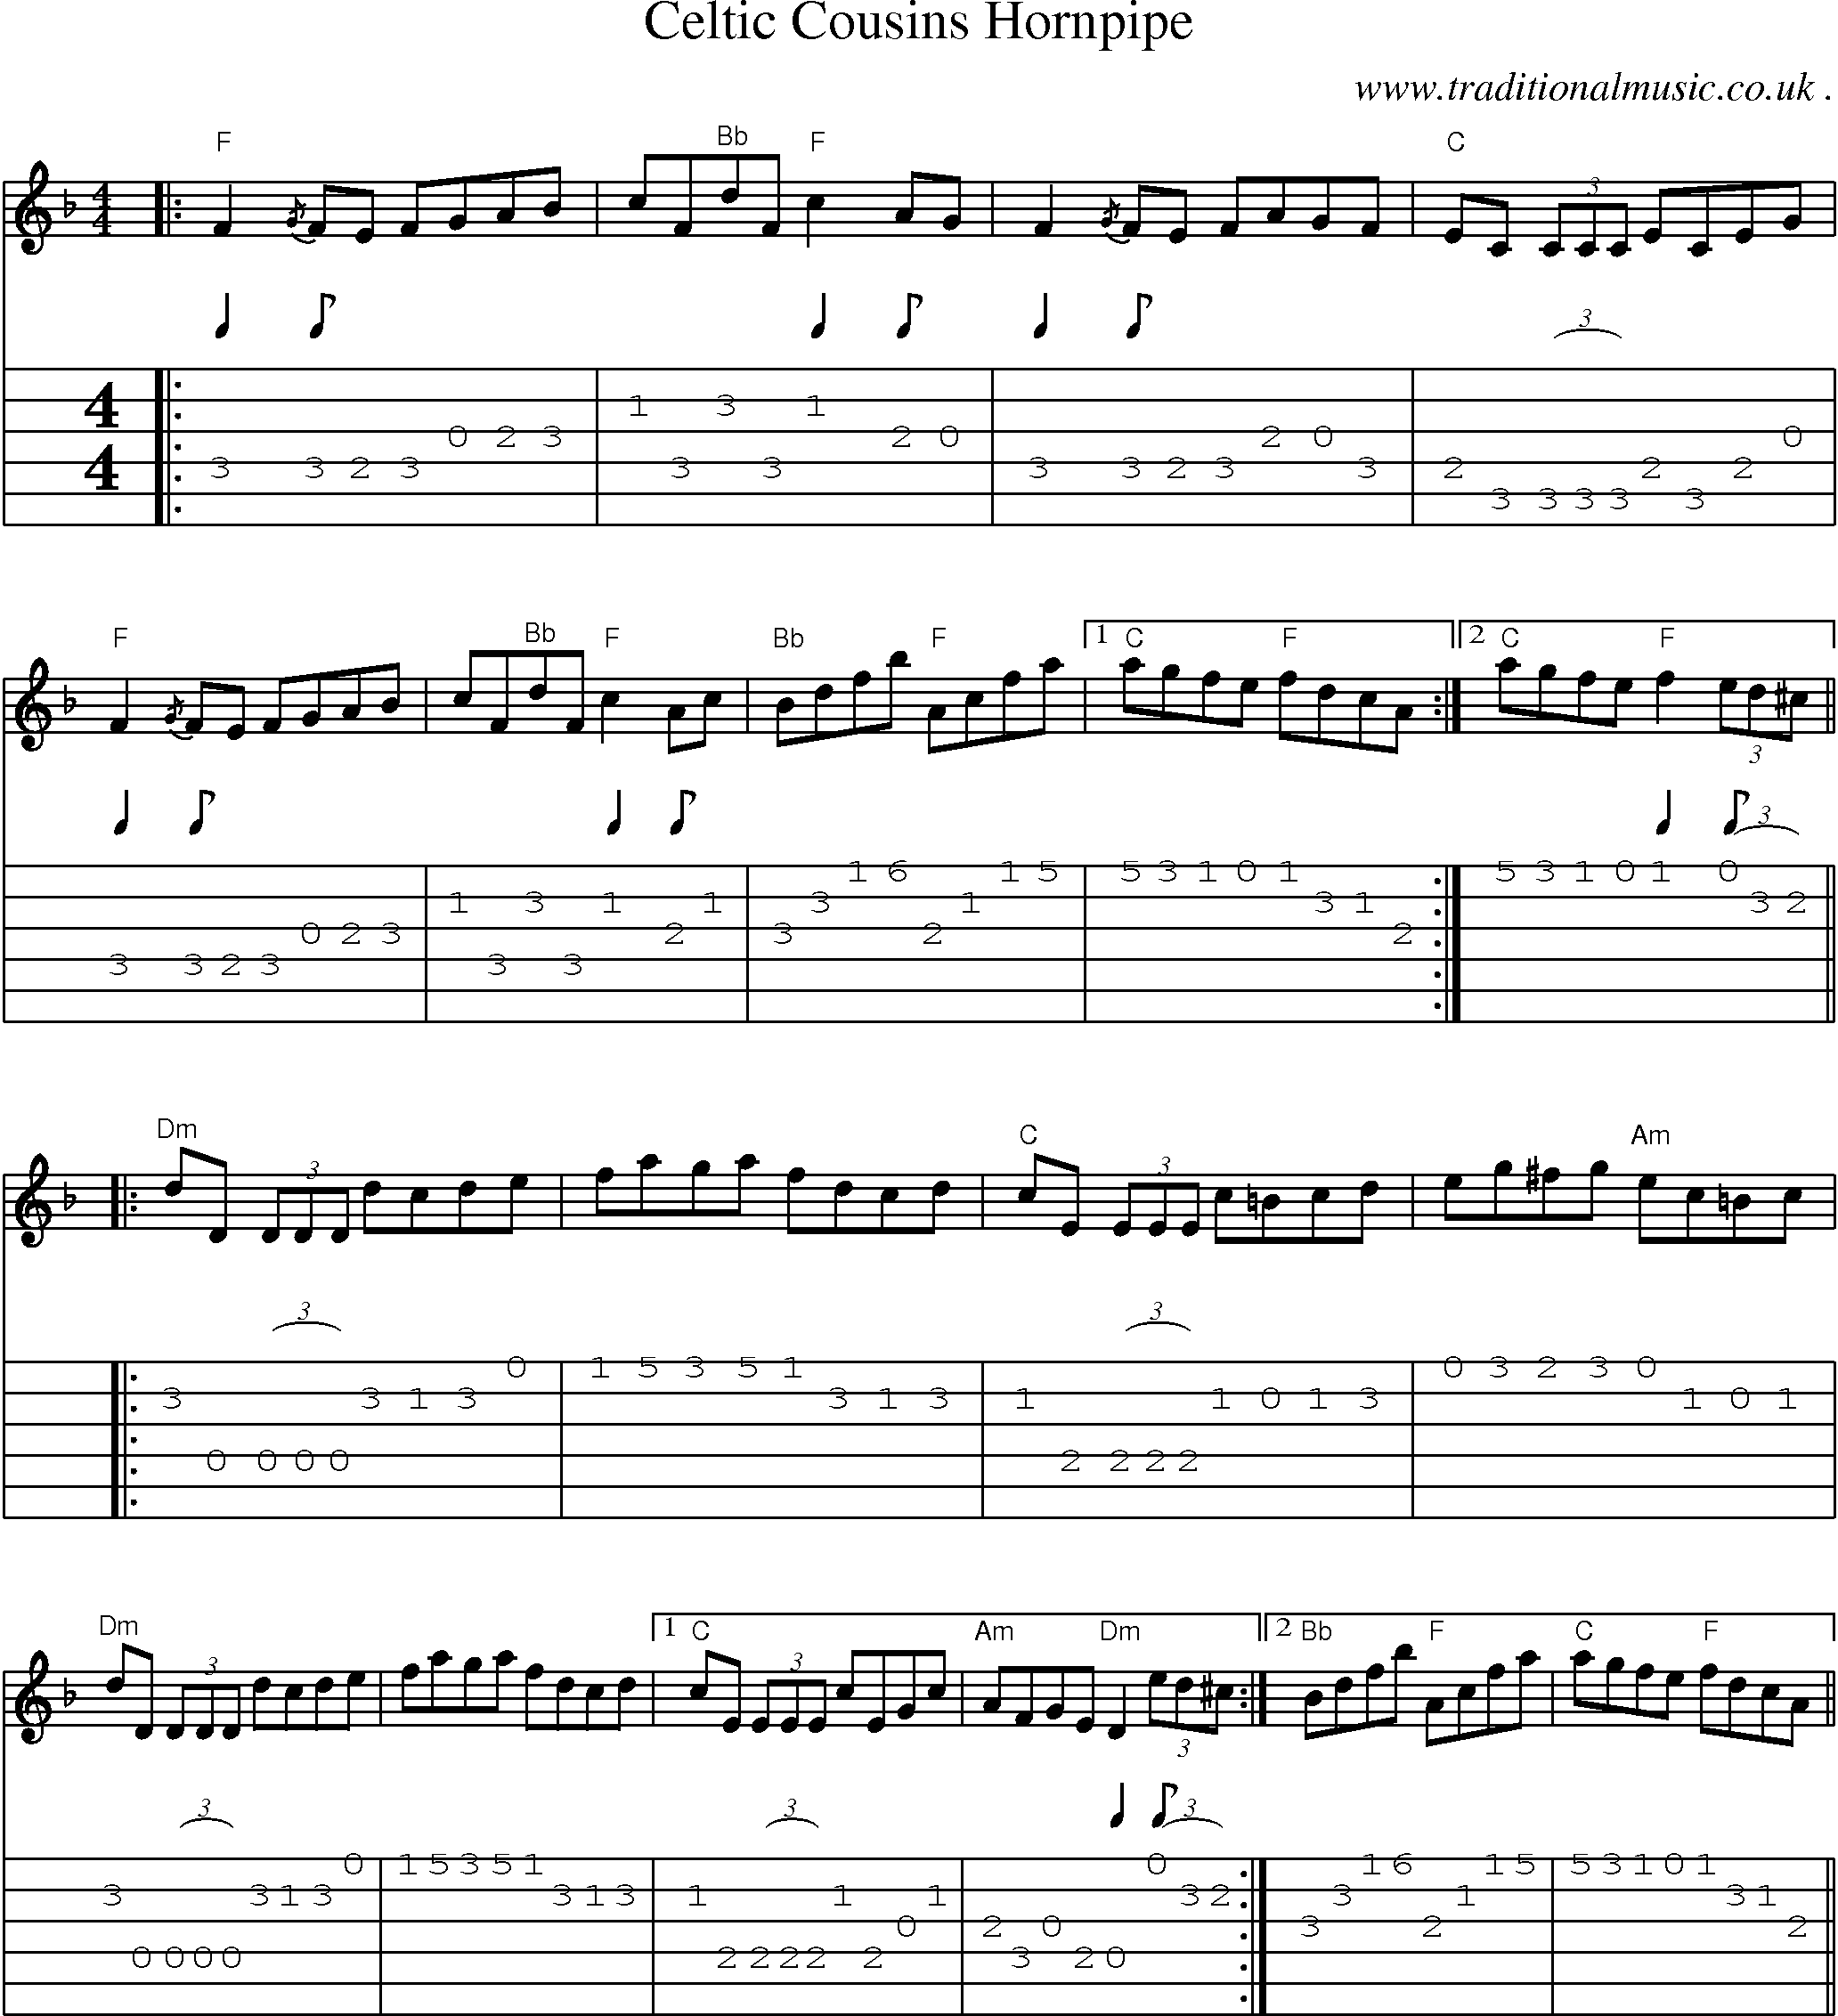 Music Score and Guitar Tabs for Celtic Cousins Hornpipe